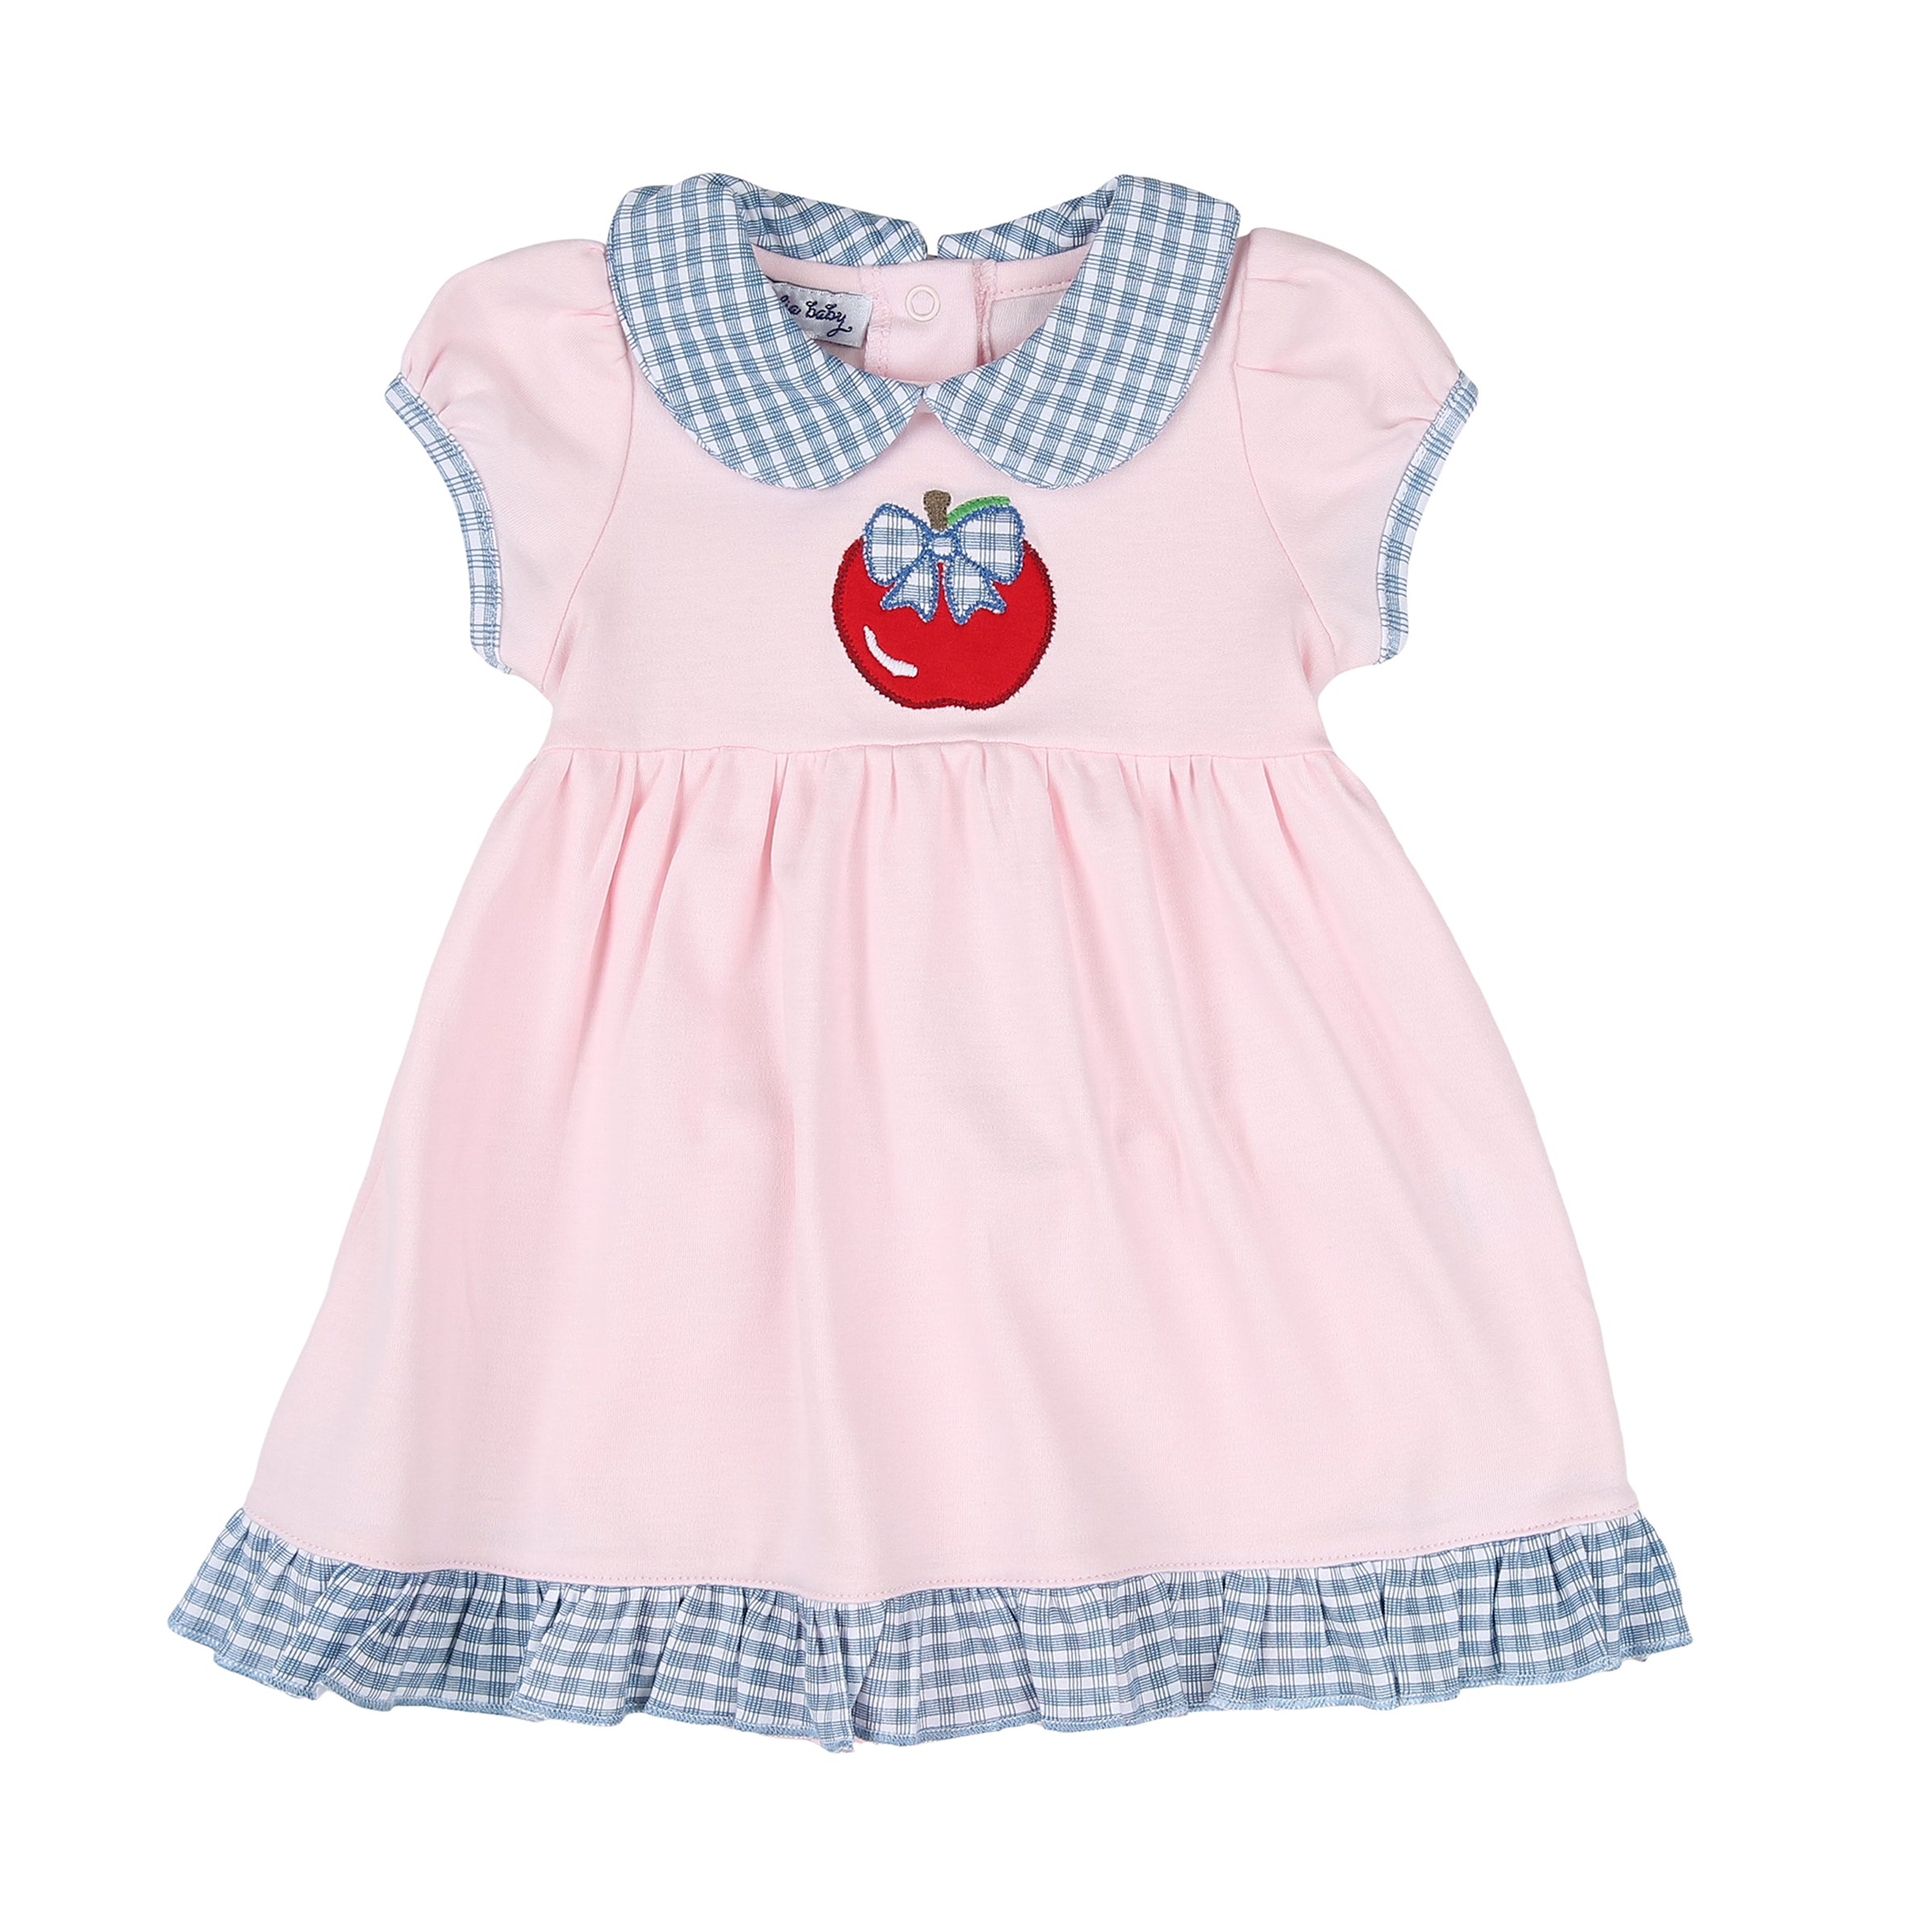 Red Delicious Collar Toddler Dress